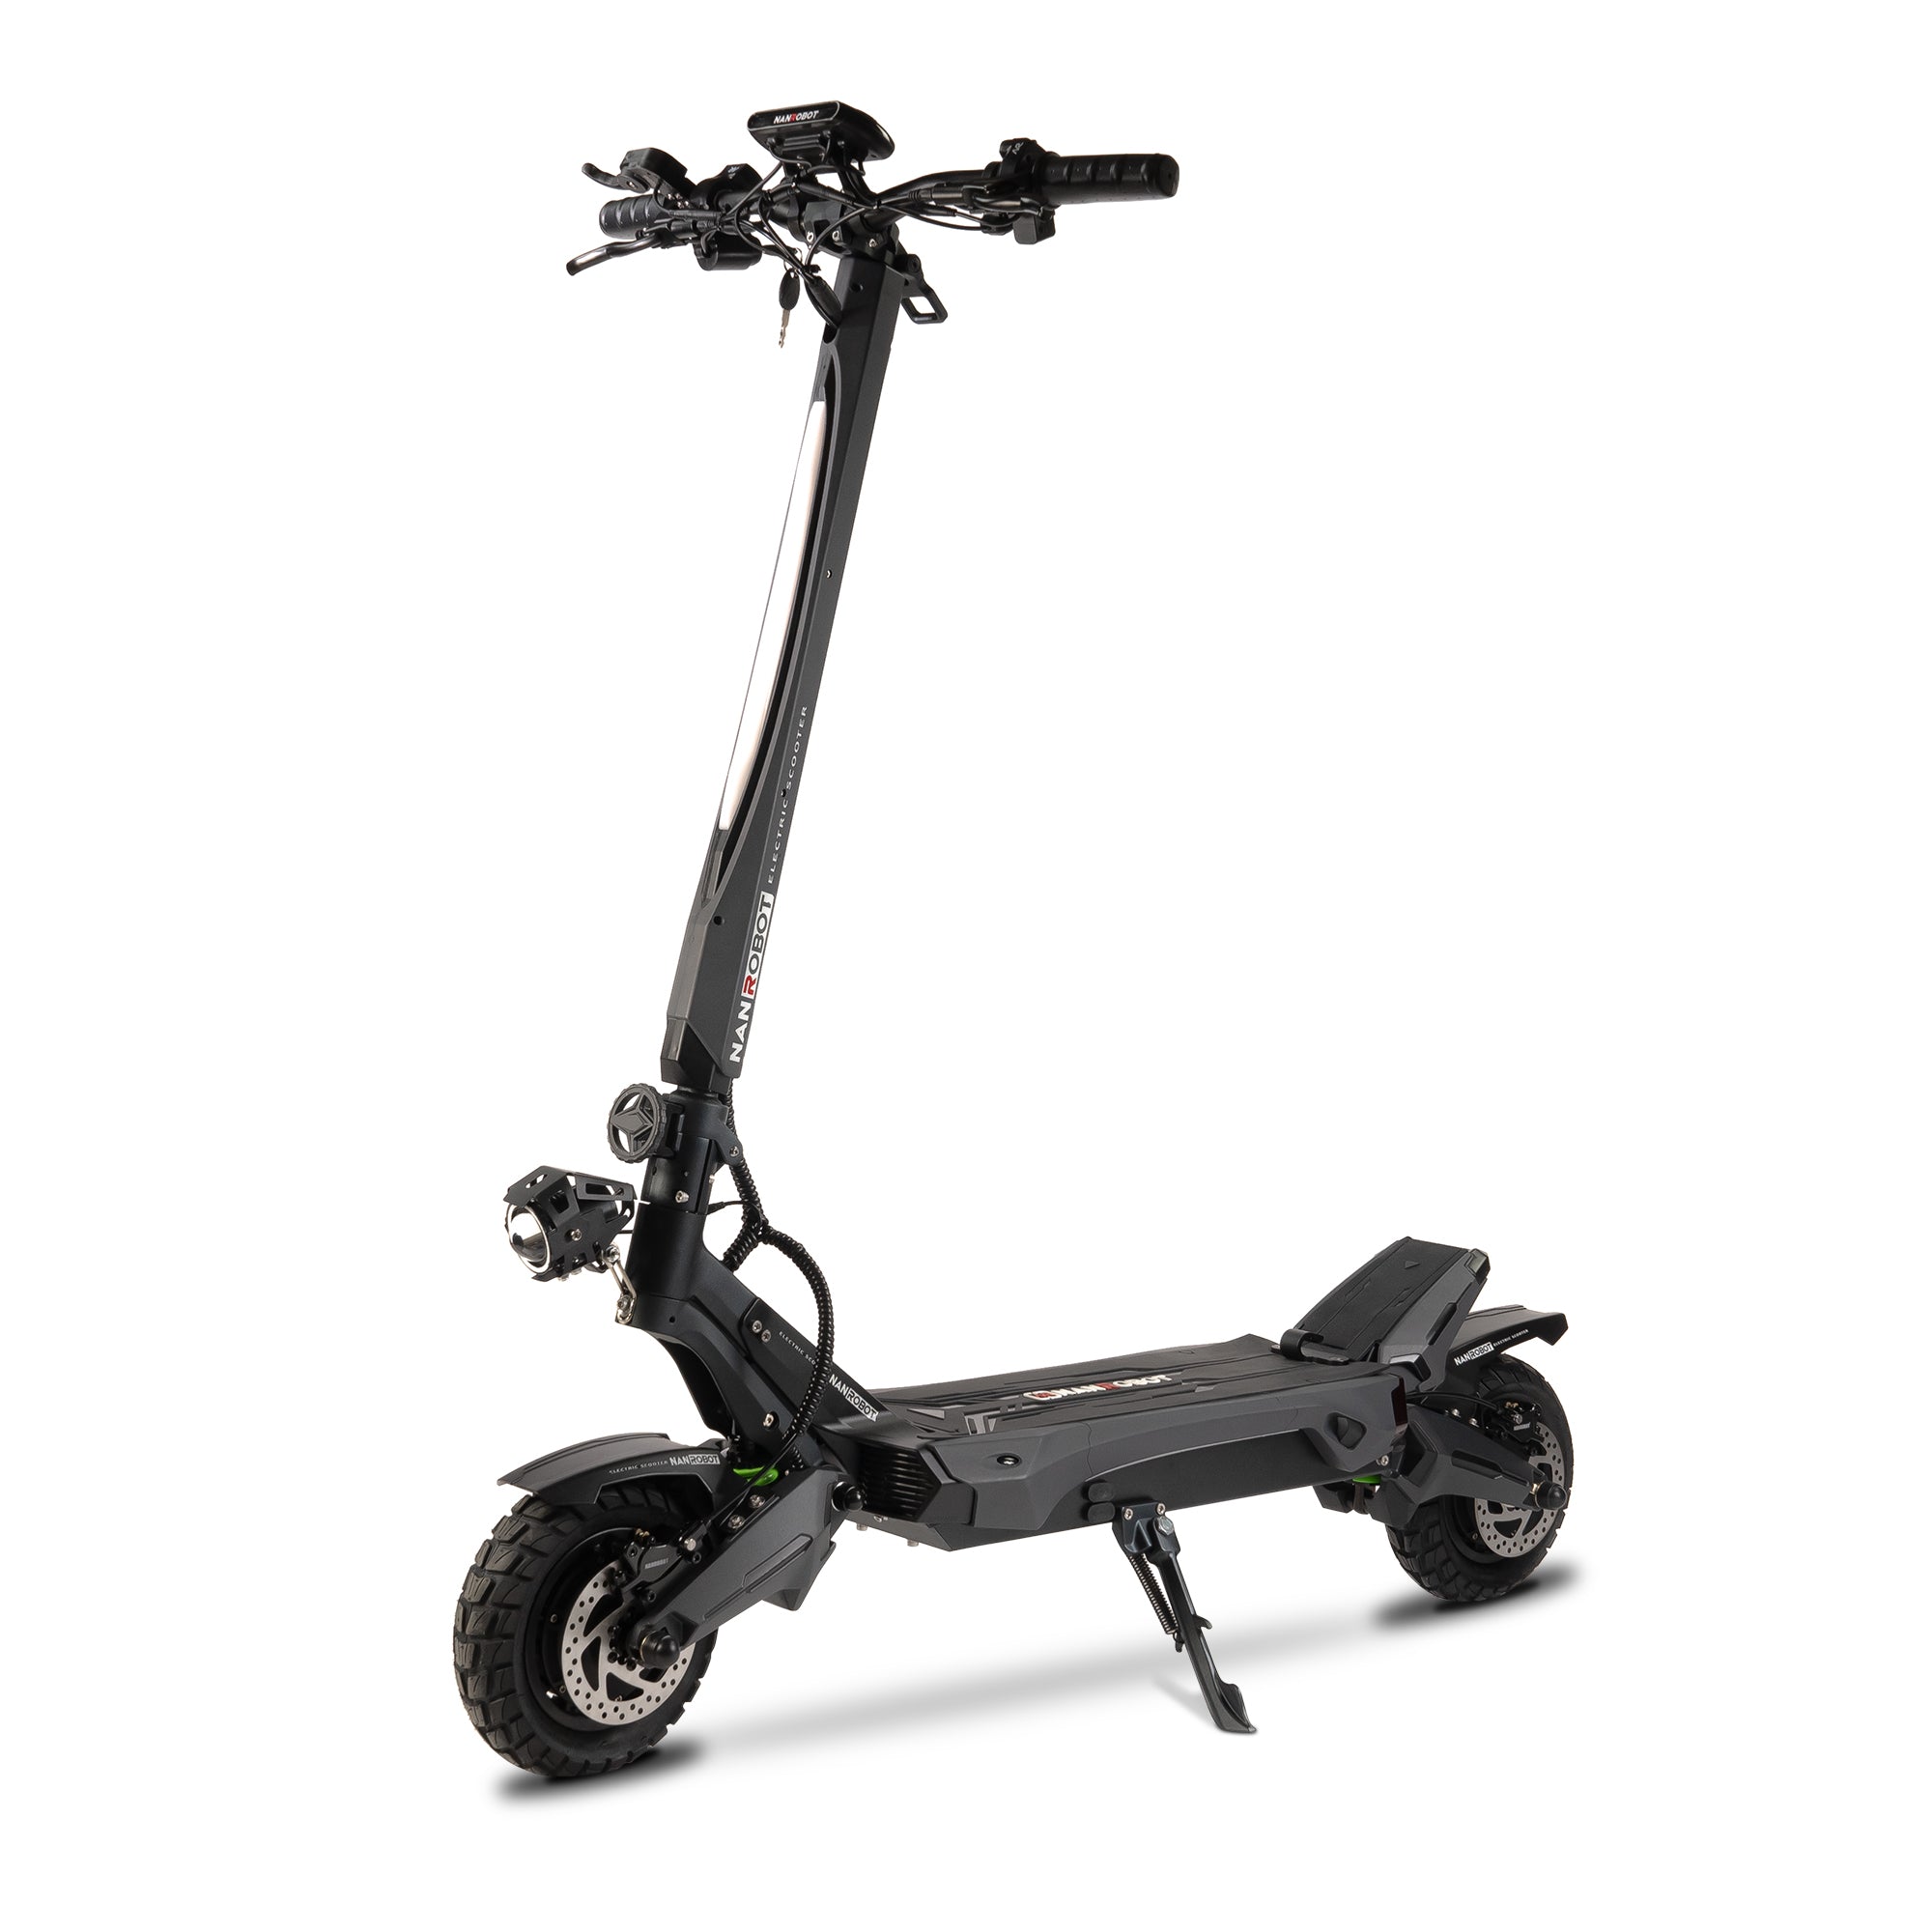 N6 NANROBOT E-Scooter with Dual Motor 1000Wx2,Range 30-40 Miles, Max Speed 40MPH and 10 inch Off-Road Tires